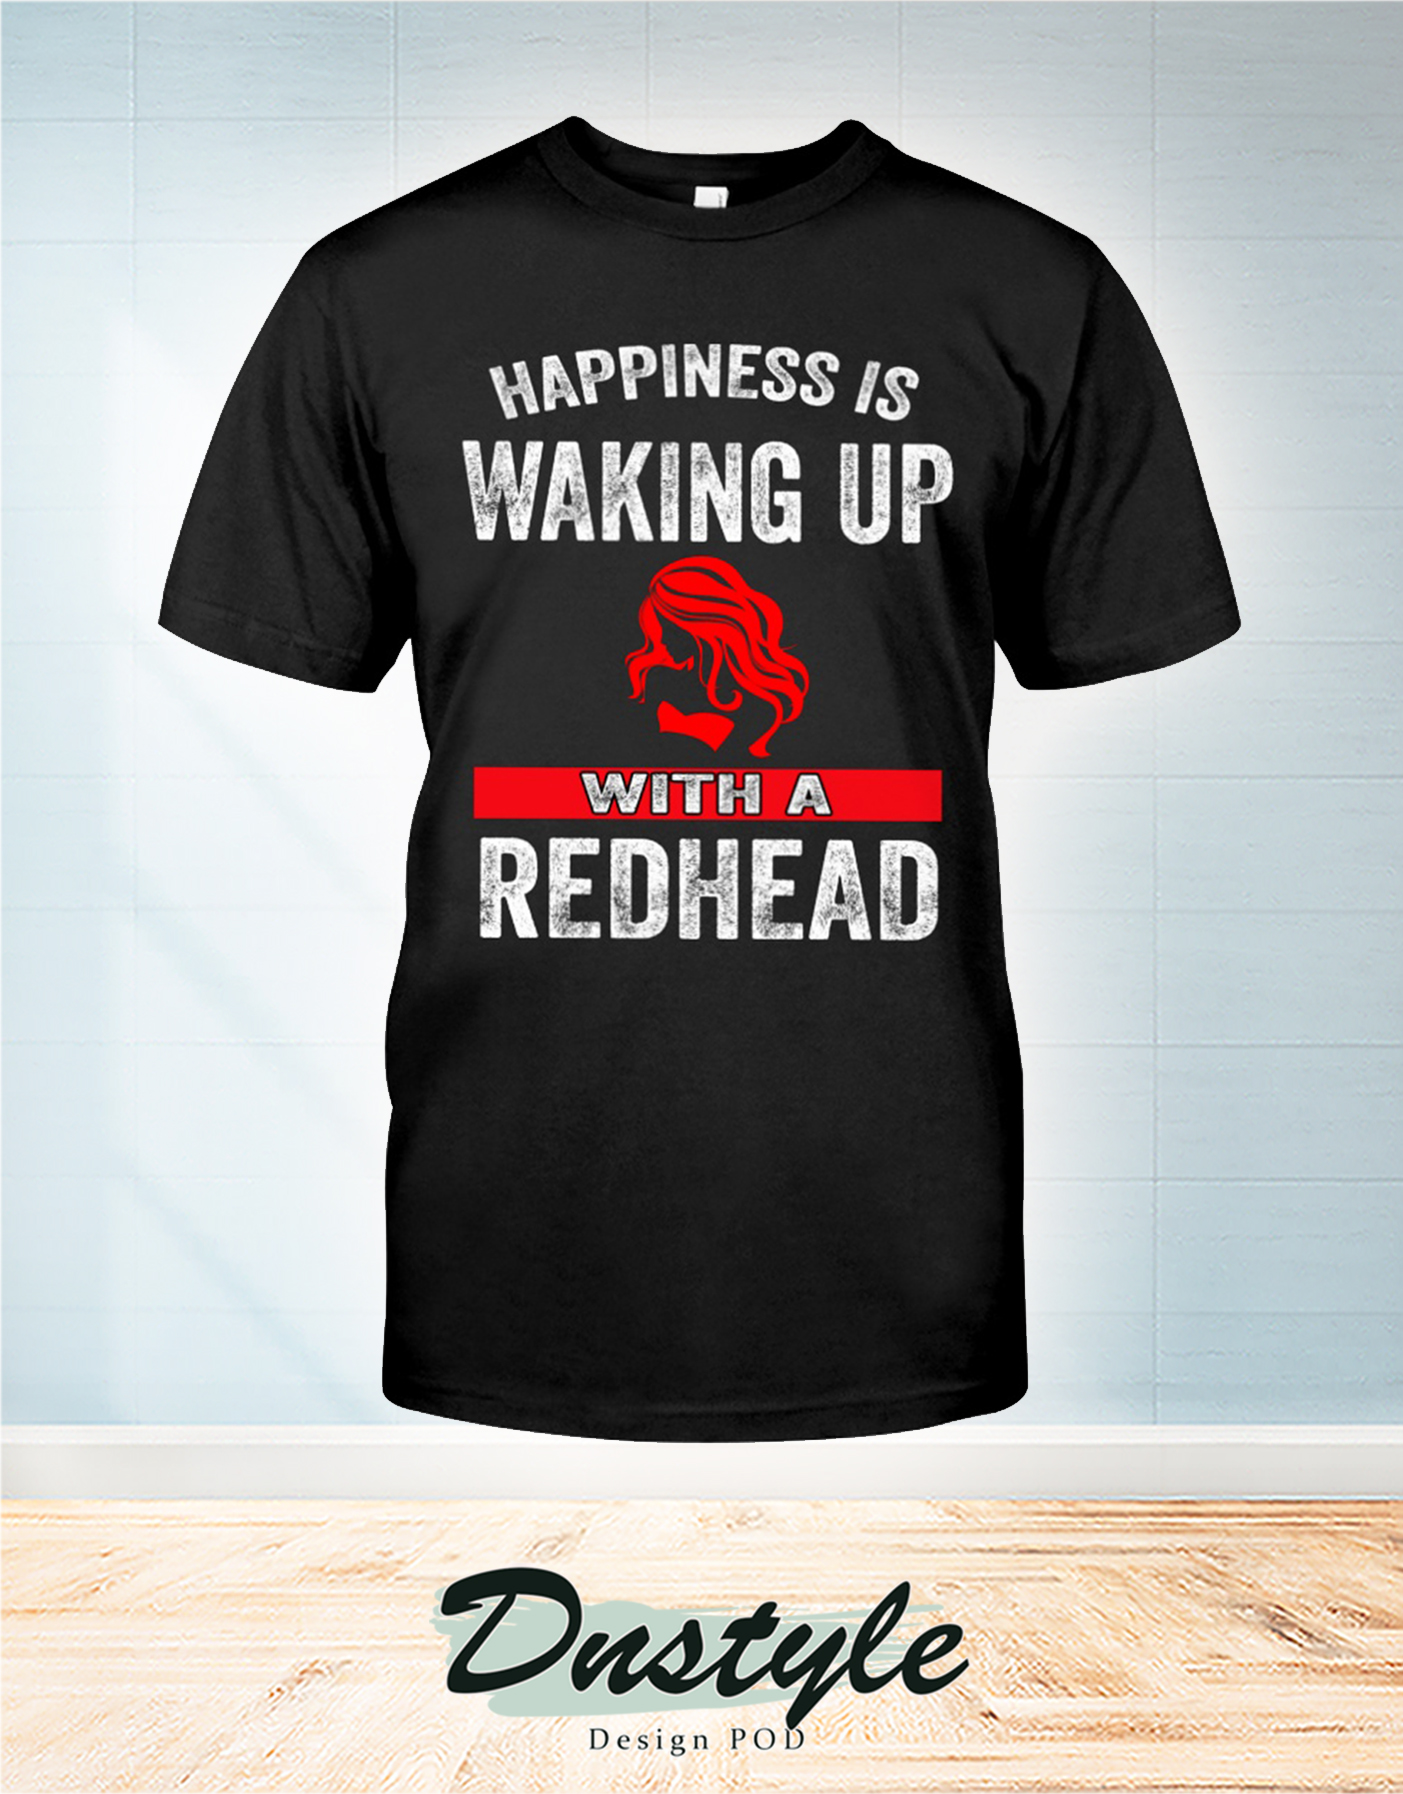 Happiness is waking up with a redhead t-shirt